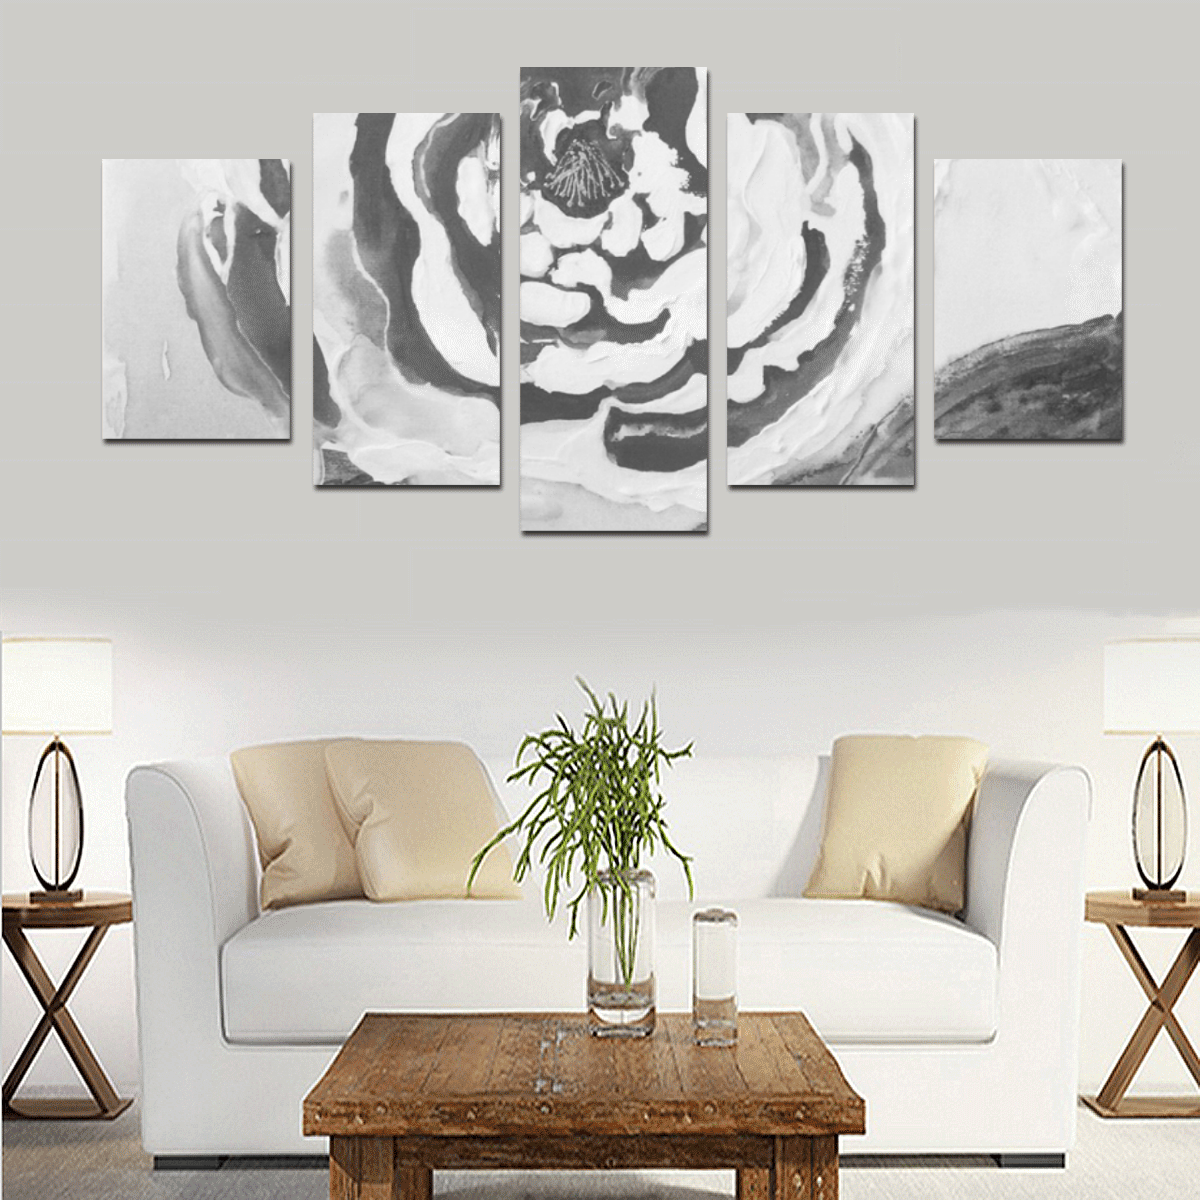 Mother's day silver year Canvas Print Sets D (No Frame)